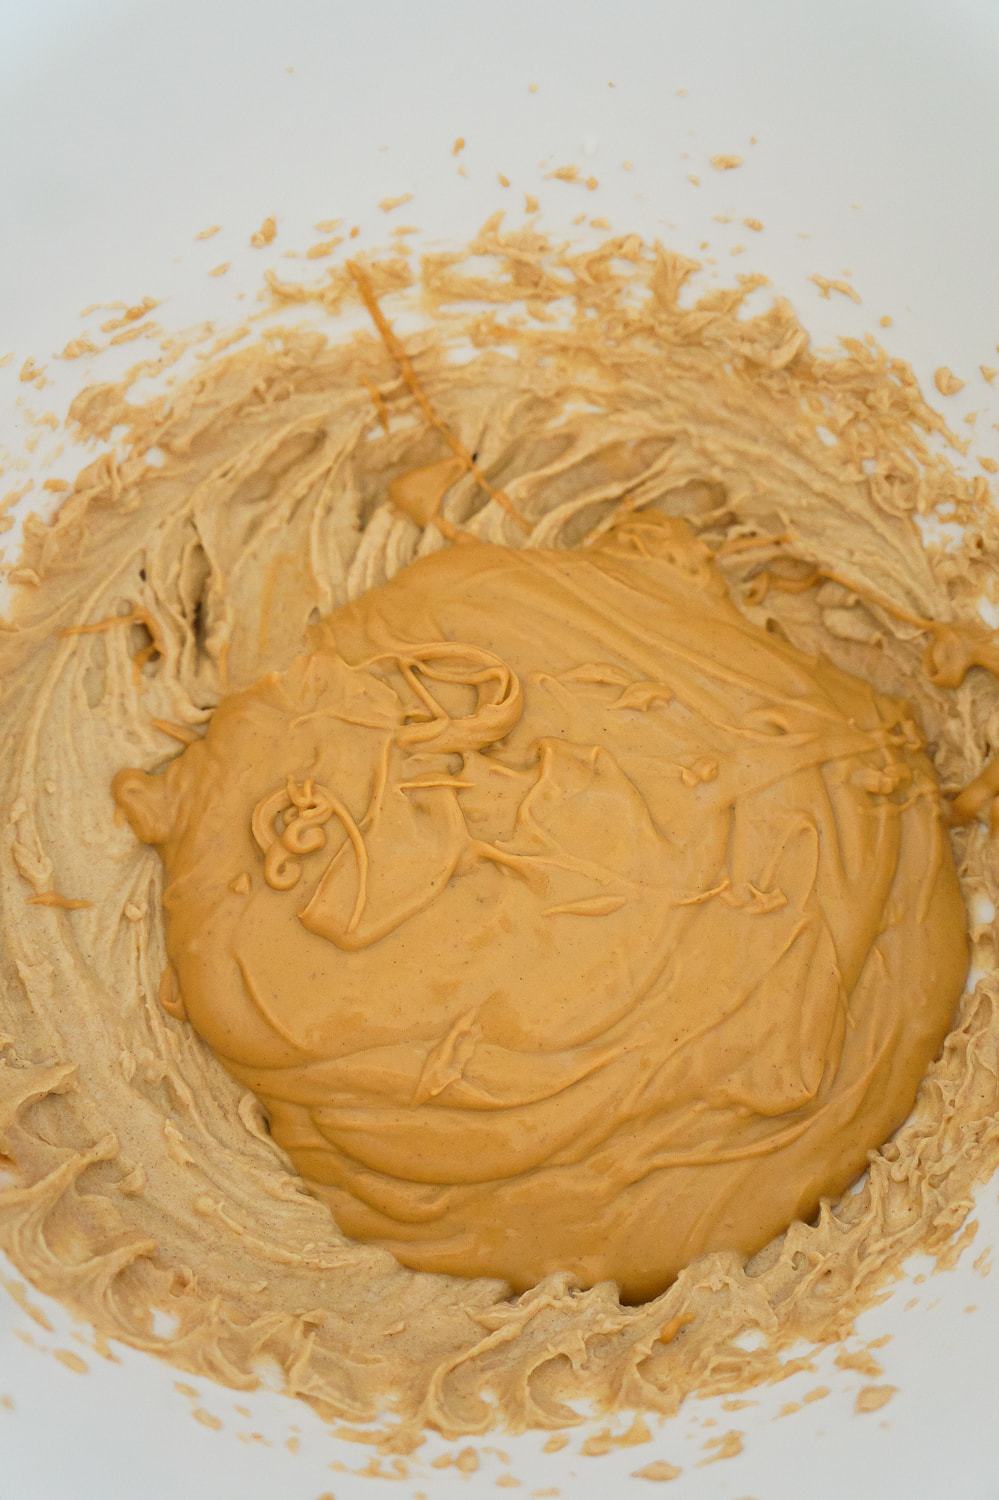 melted peanut butter chips added to peanut butter mixture in a mixing bowl